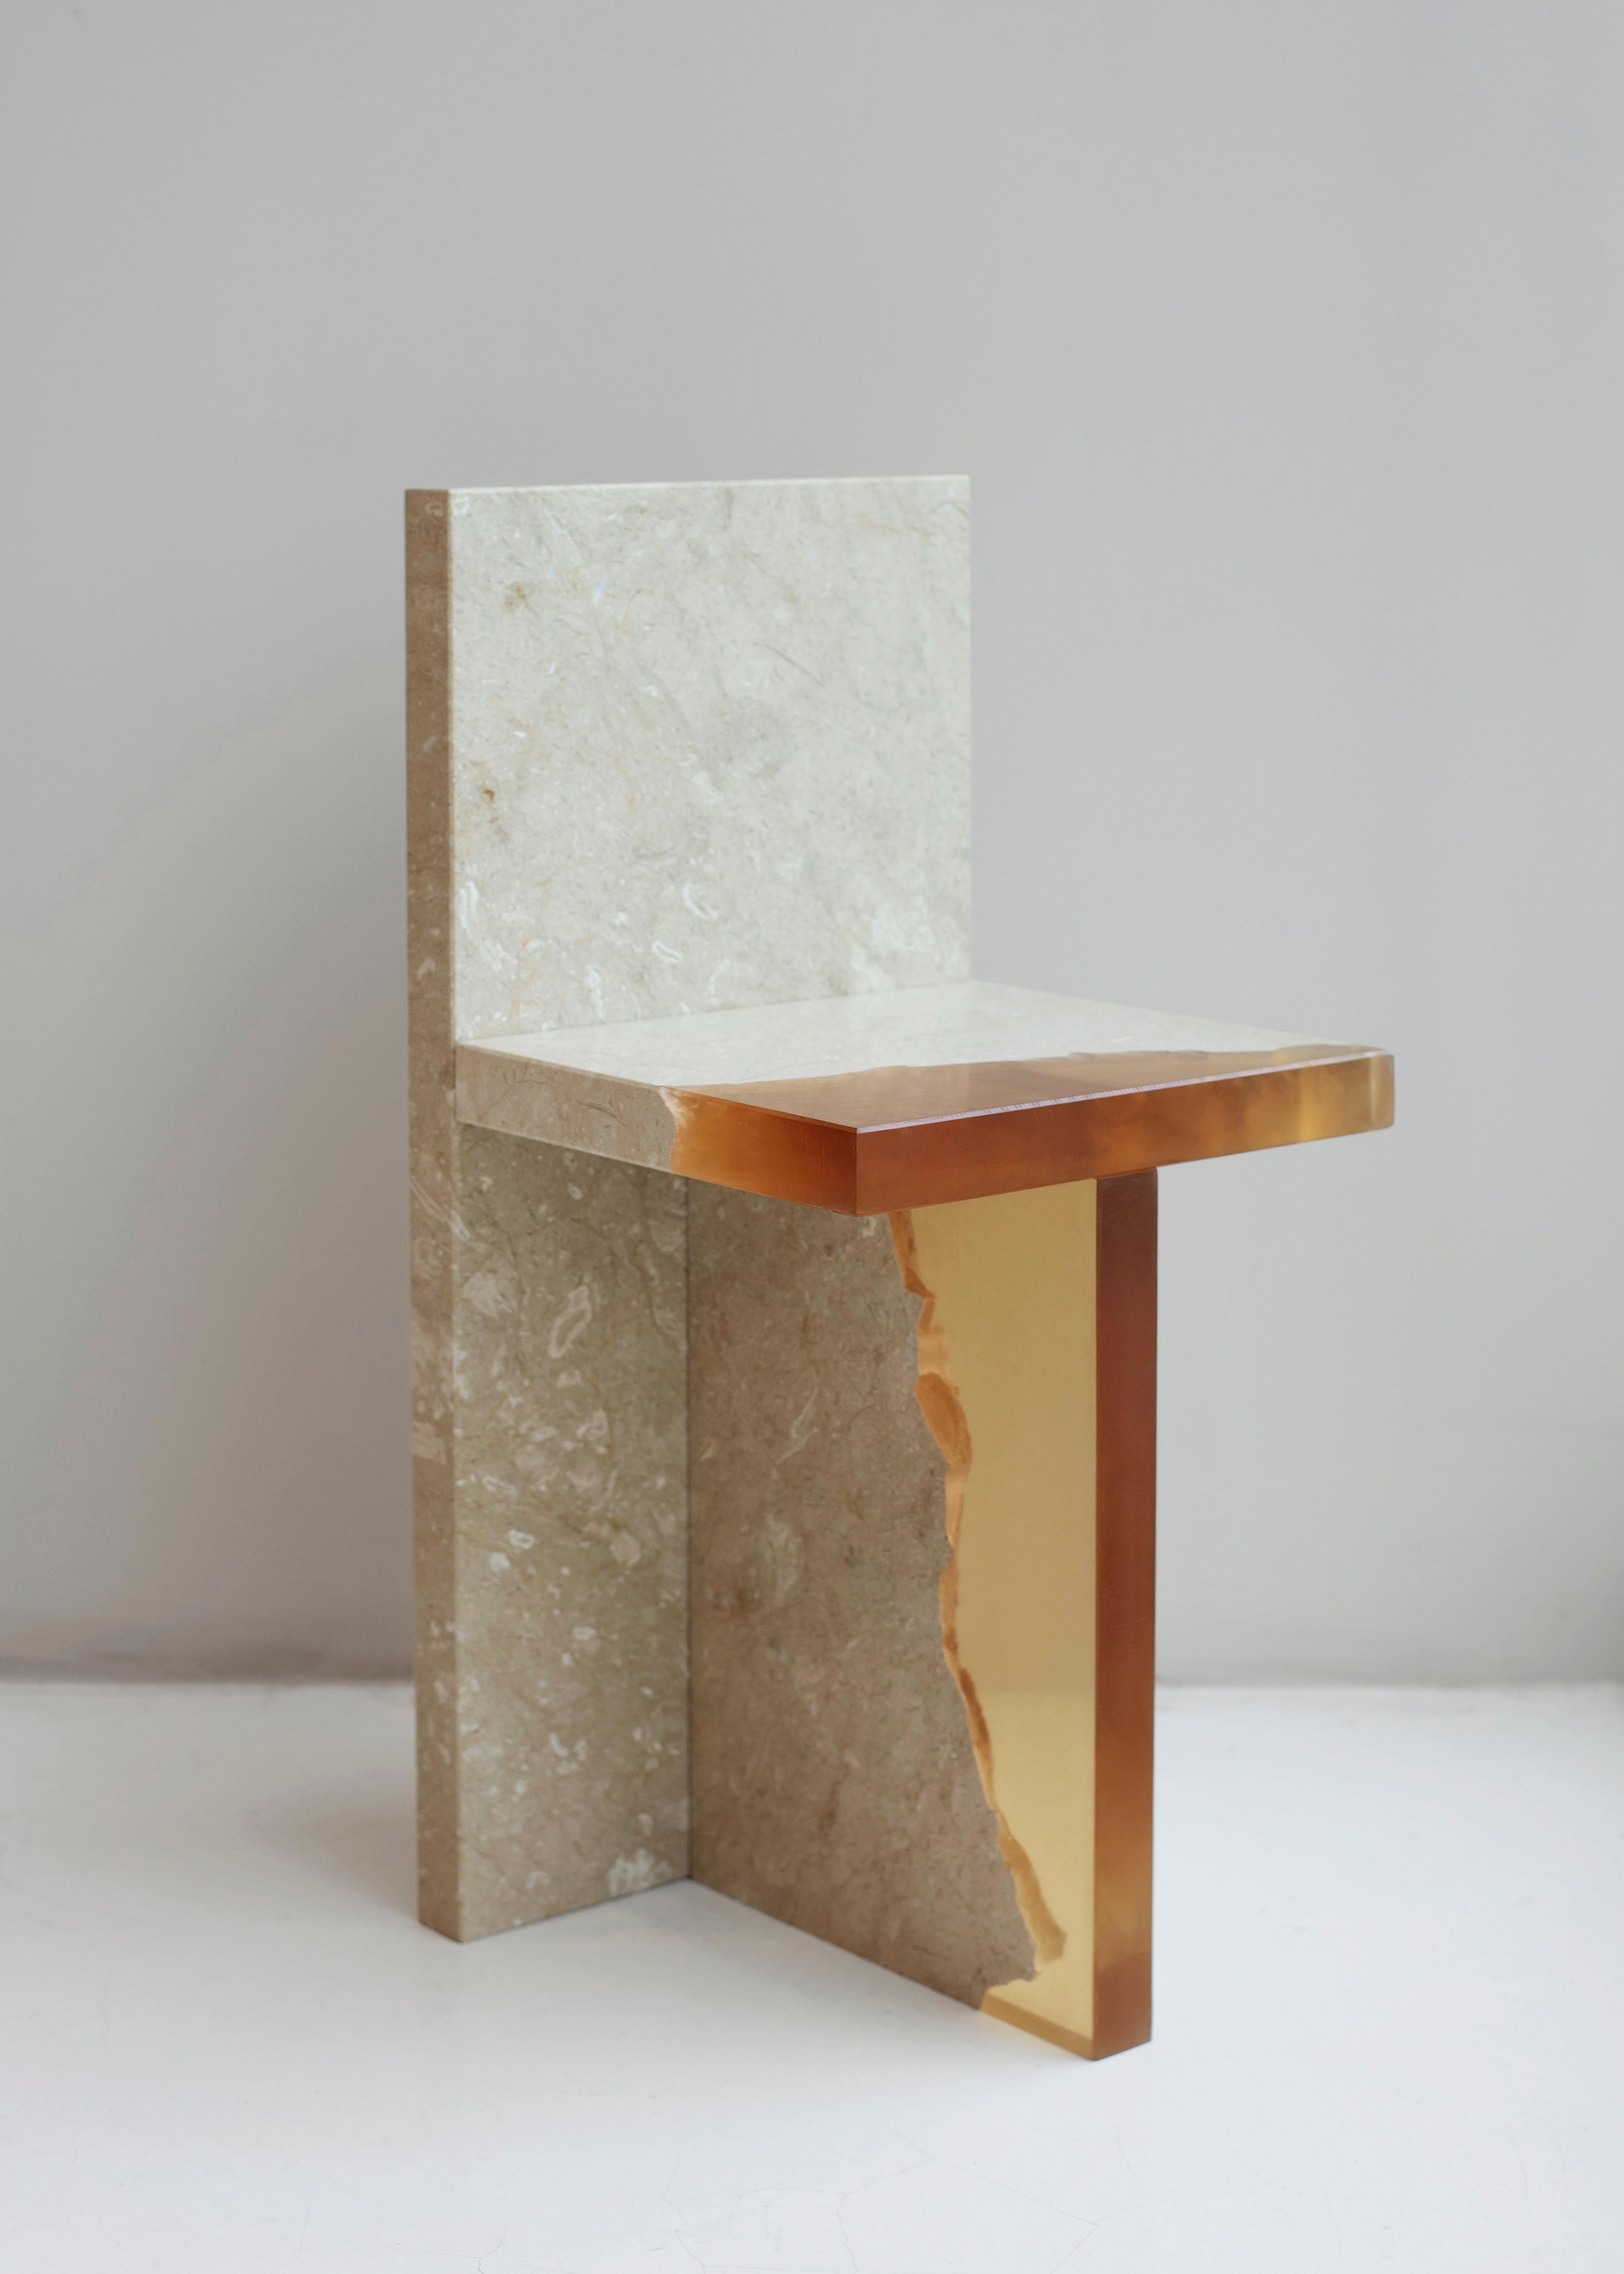 Crystal Resin and Marble, Fragment Chair, Jang Hea Kyoung 1